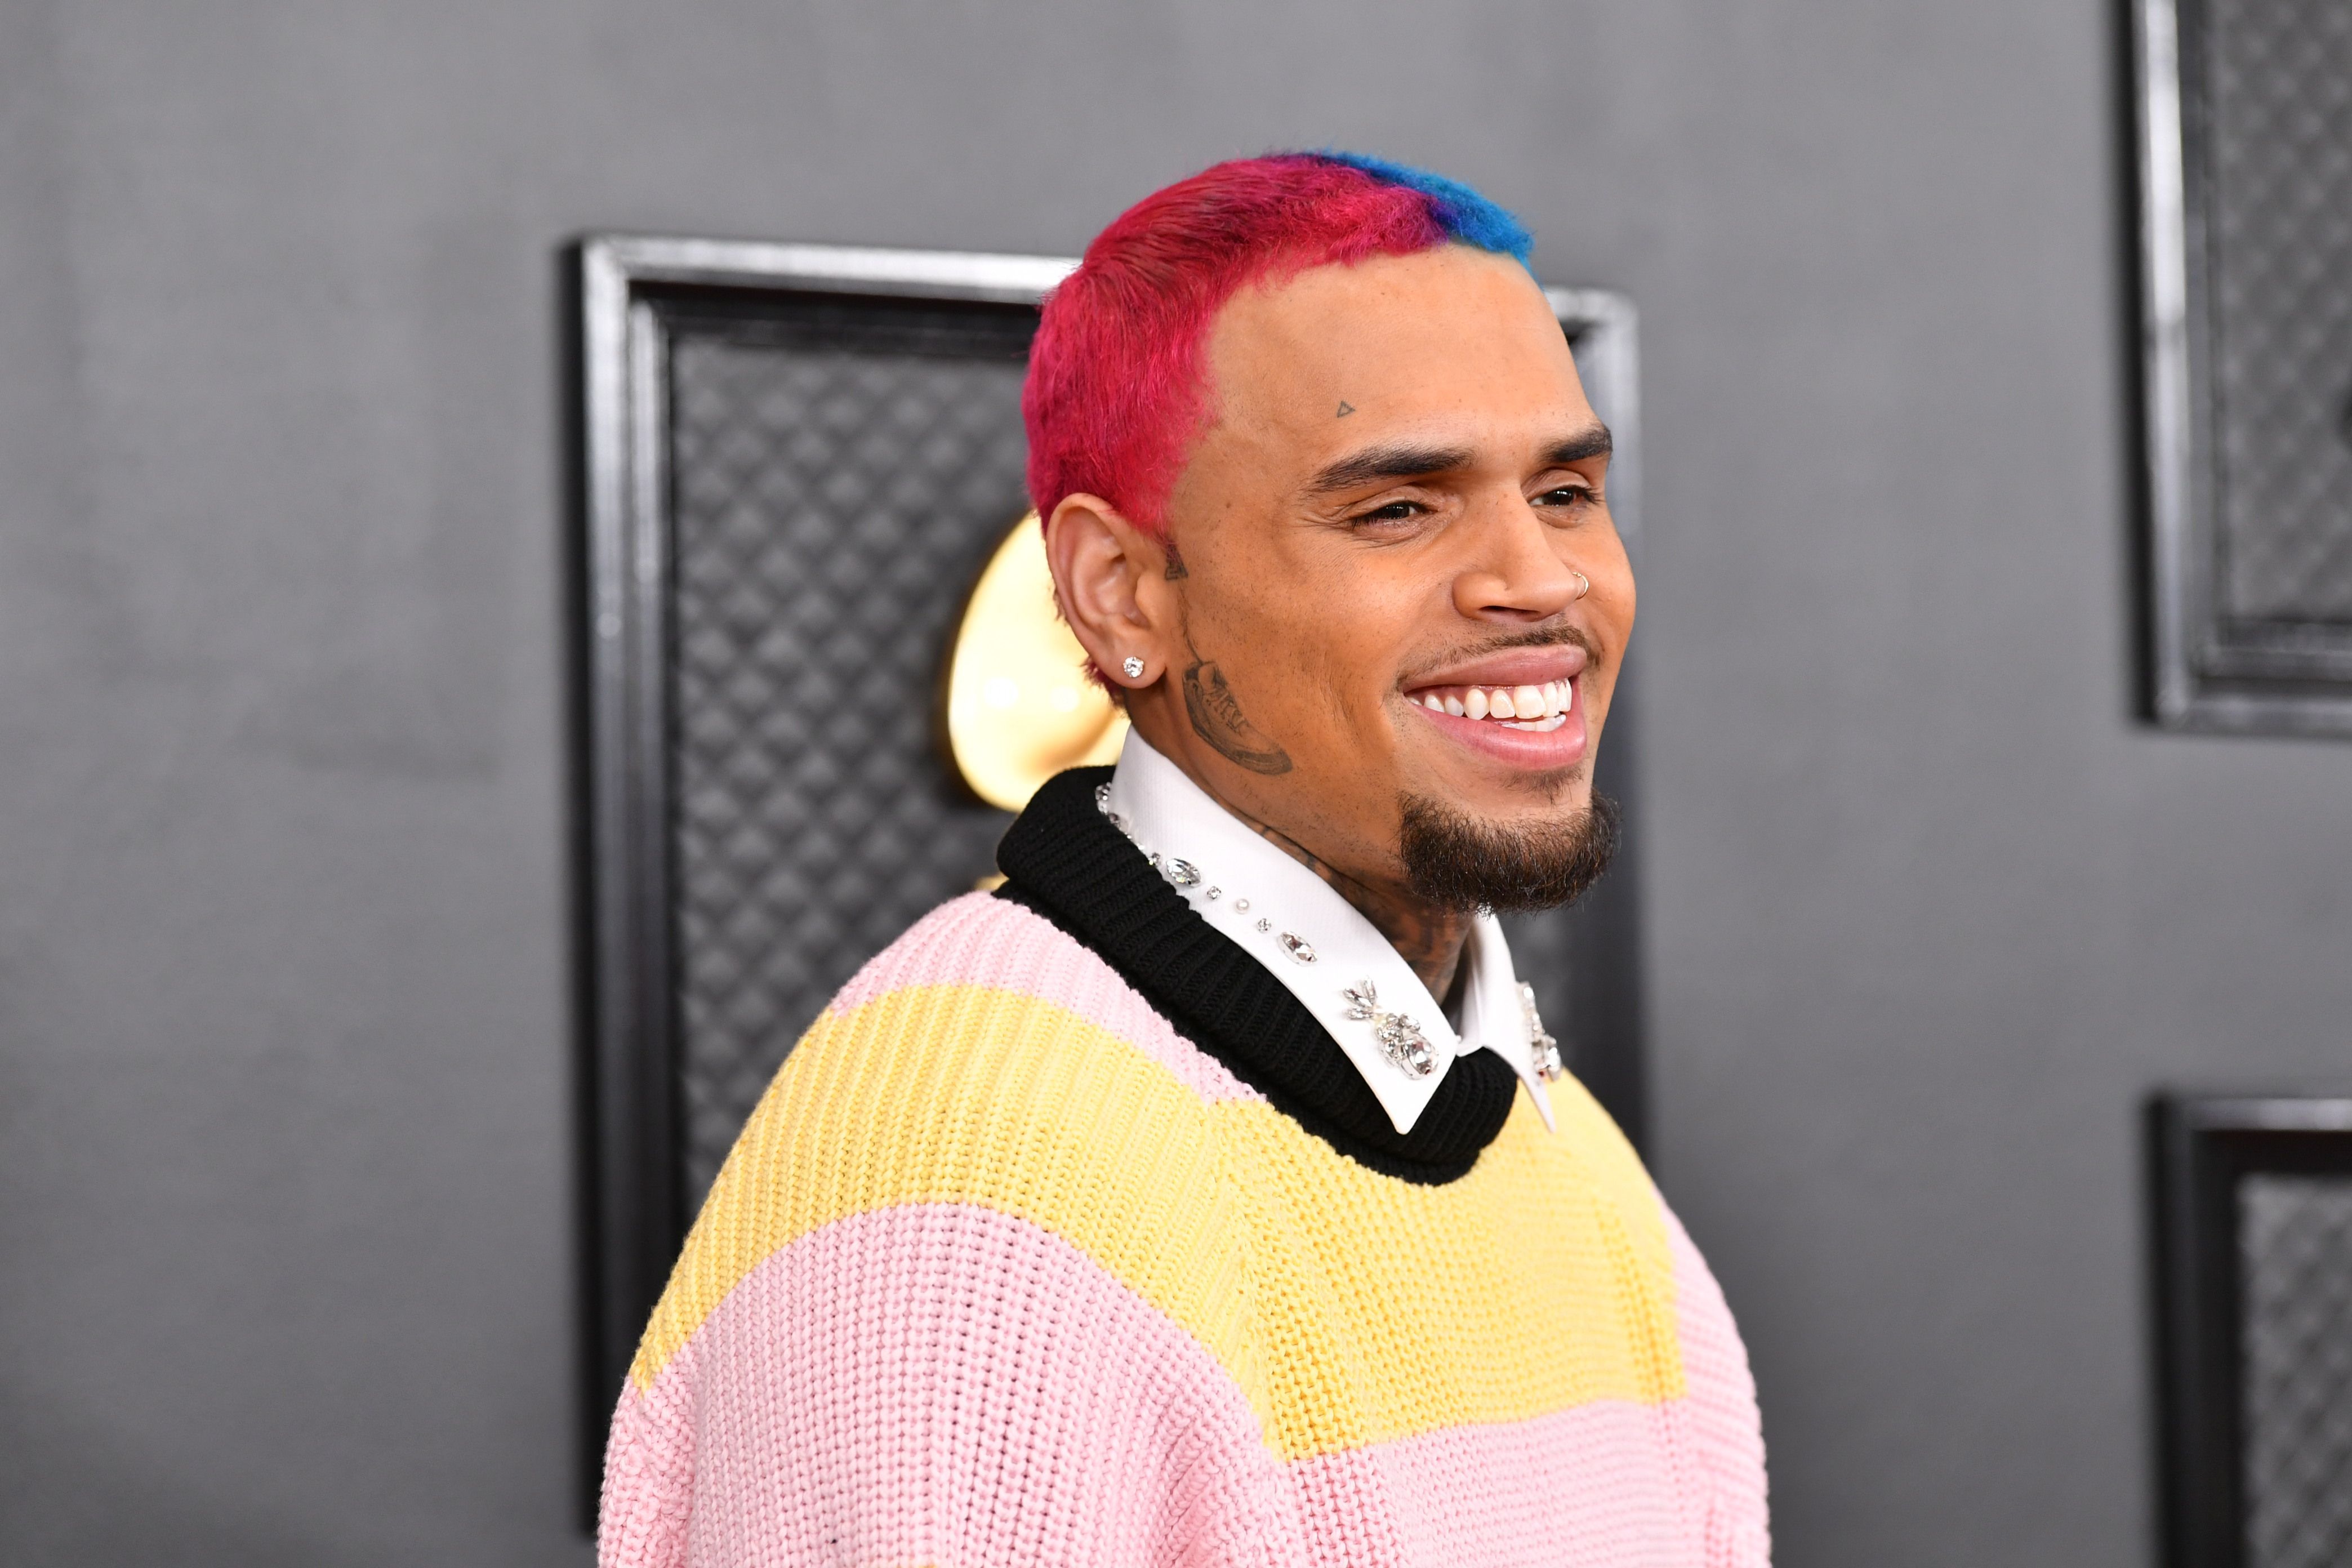 Chris Brown attends the 62nd Annual GRAMMY Awards at Staples Center on January 26, 2020 in Los Angeles, California. | Source: Getty Images